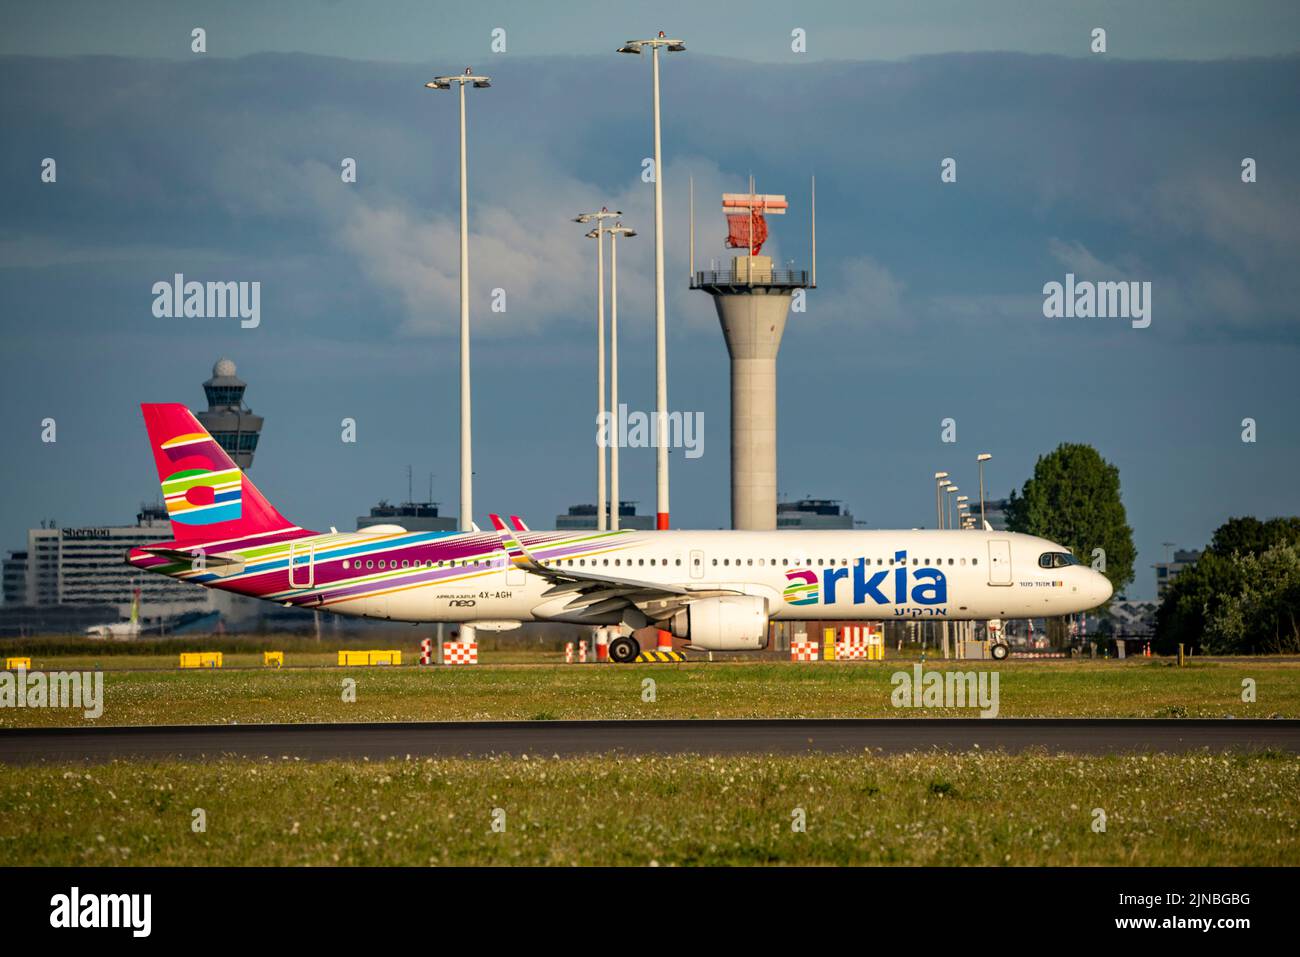 Amsterdam Shiphol Airport, Polderbaan, one of 6 runways, tower air traffic control, on taxiway to take-off, 4X-AGH Arkia, Israeli Airlines Airbus A321 Stock Photo